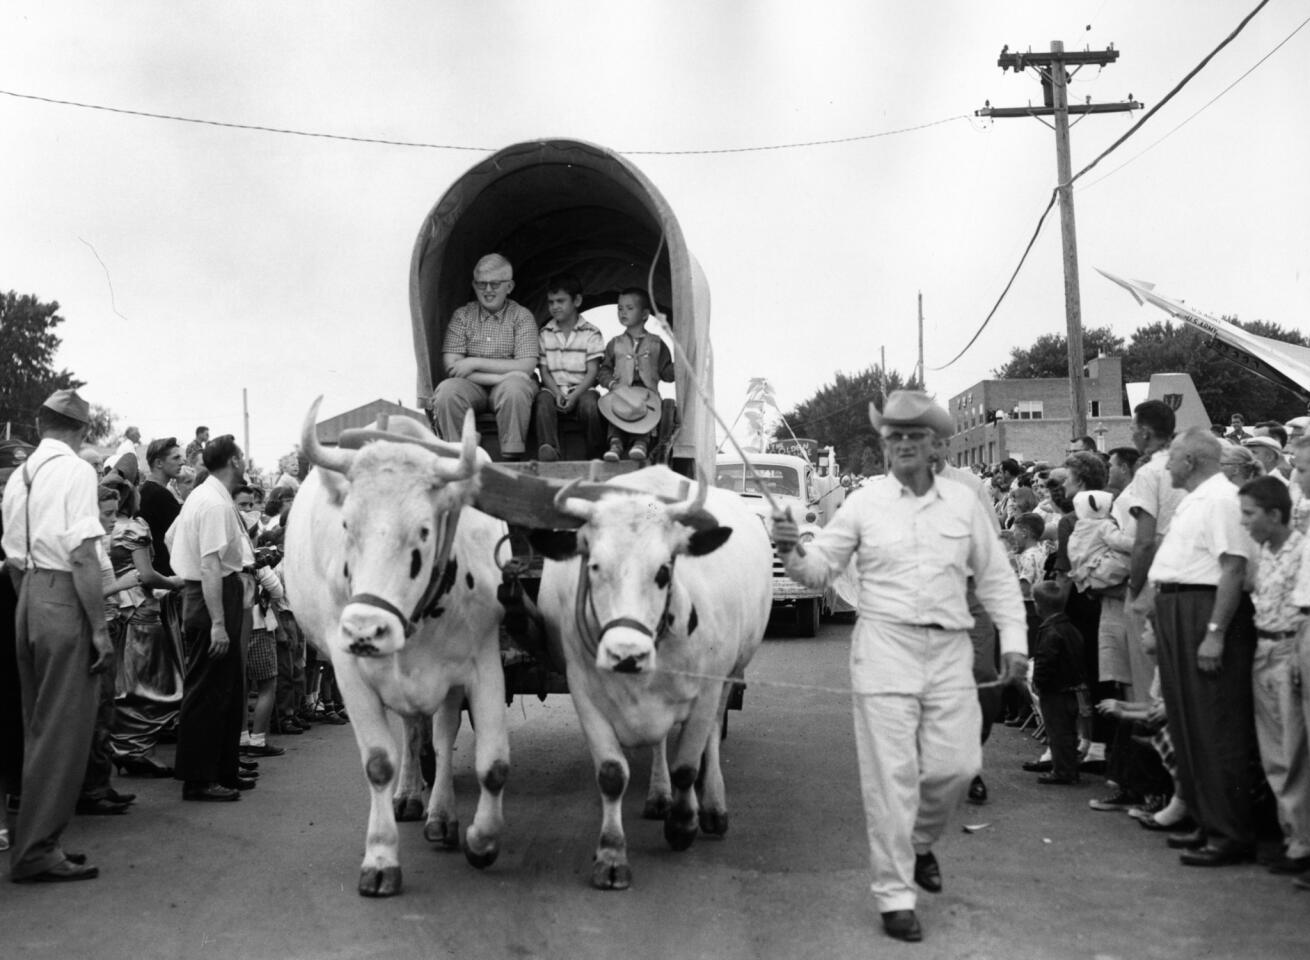 July 19, 1959: The First National Bank of Mundelein's float in the Jubilee parade in 1959, featuring oxen from Hawthorne-Mellody Farms.